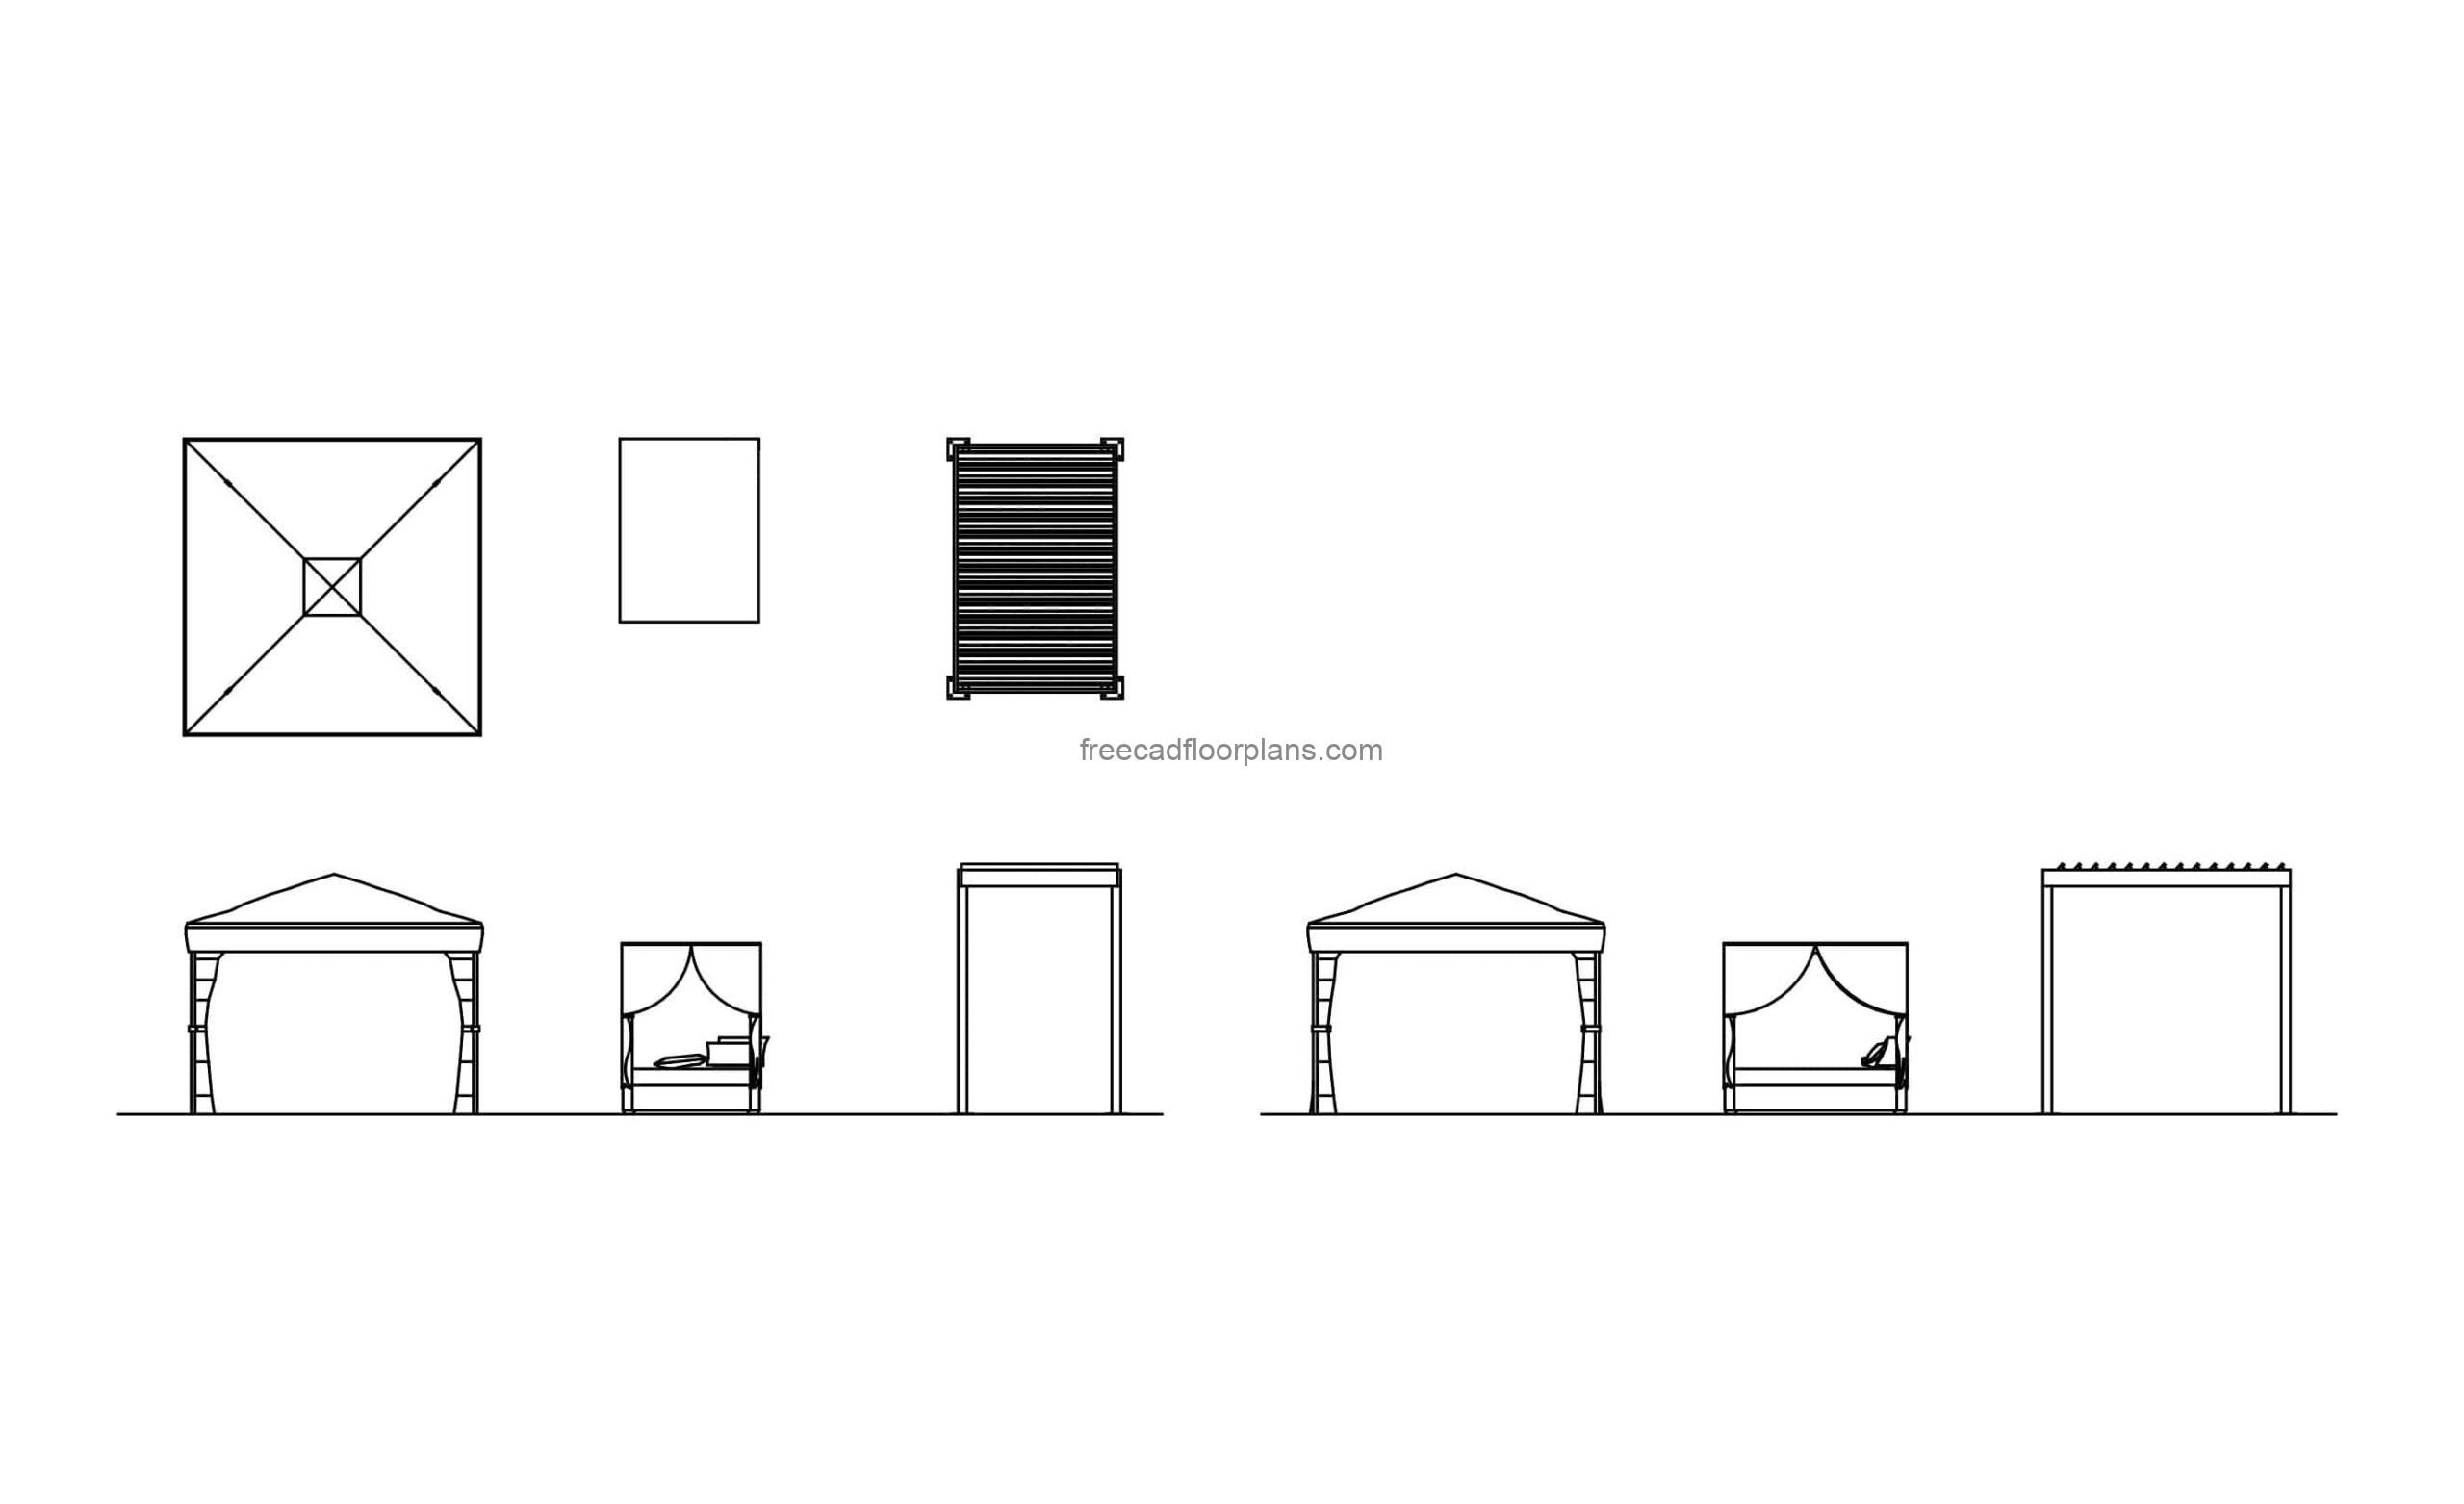 outdoor canopies cad block drawings, 2d plan and elevations views, dwg file for free download